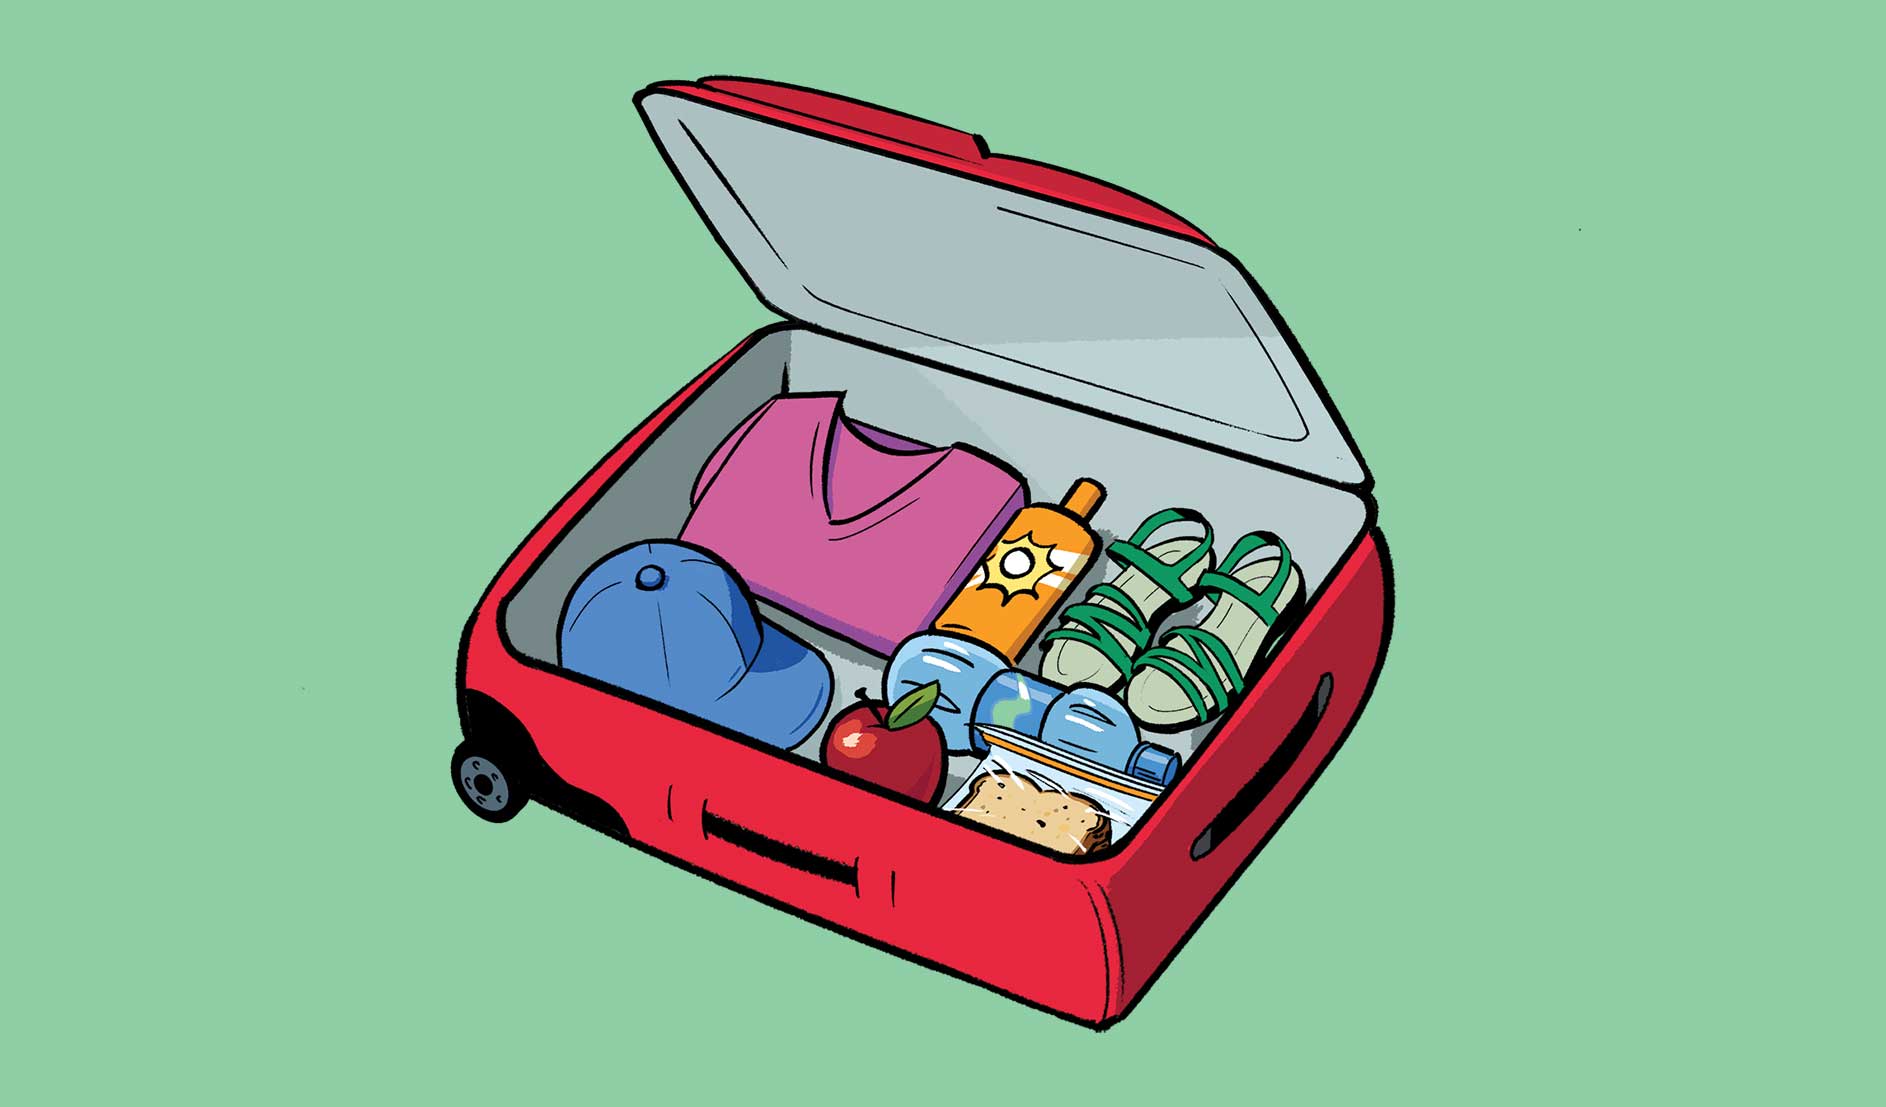 Illustration of a neatly packed suitcase